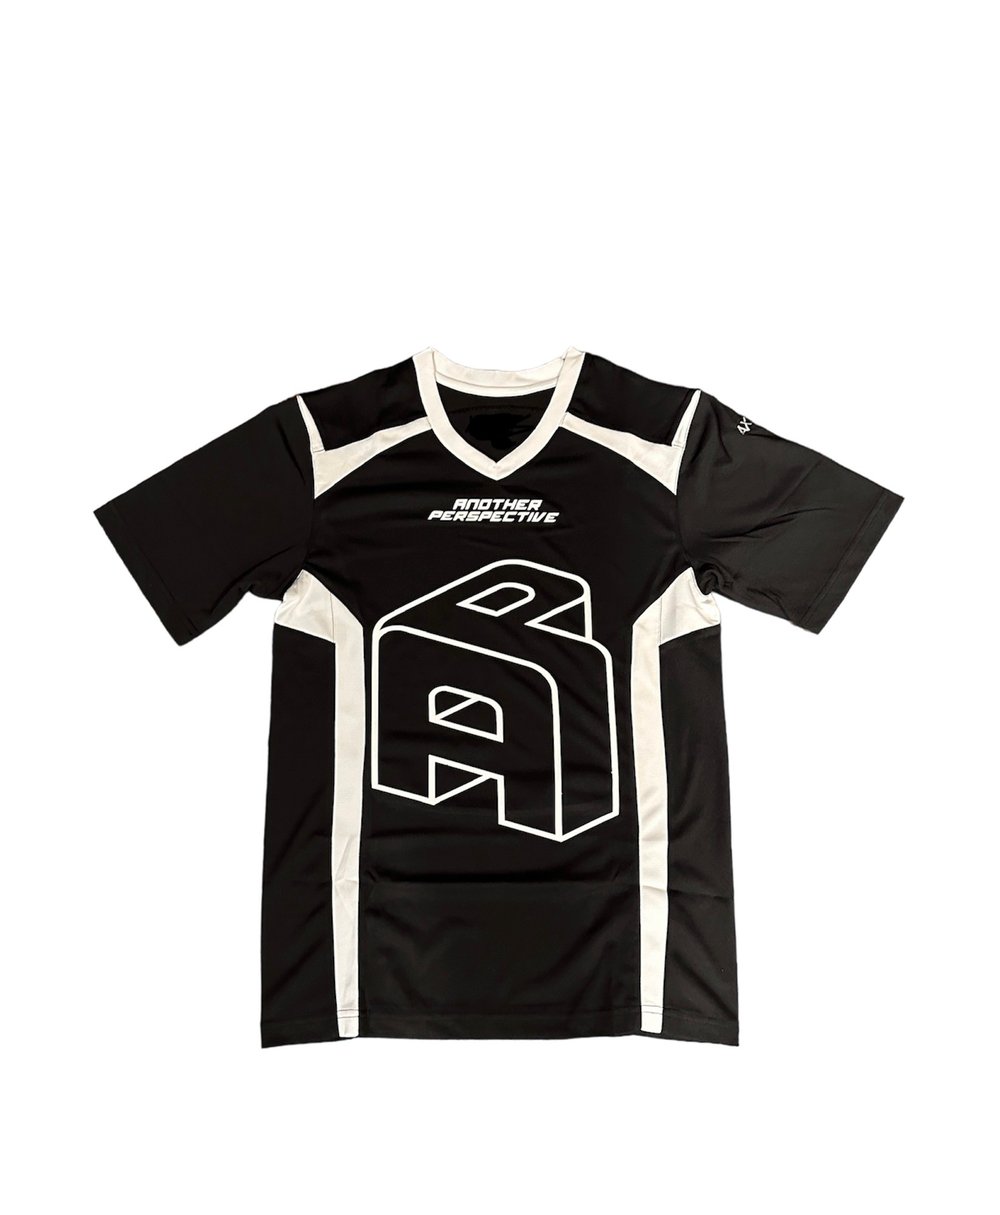 Image of Black/White 3-D Perspective Jersey